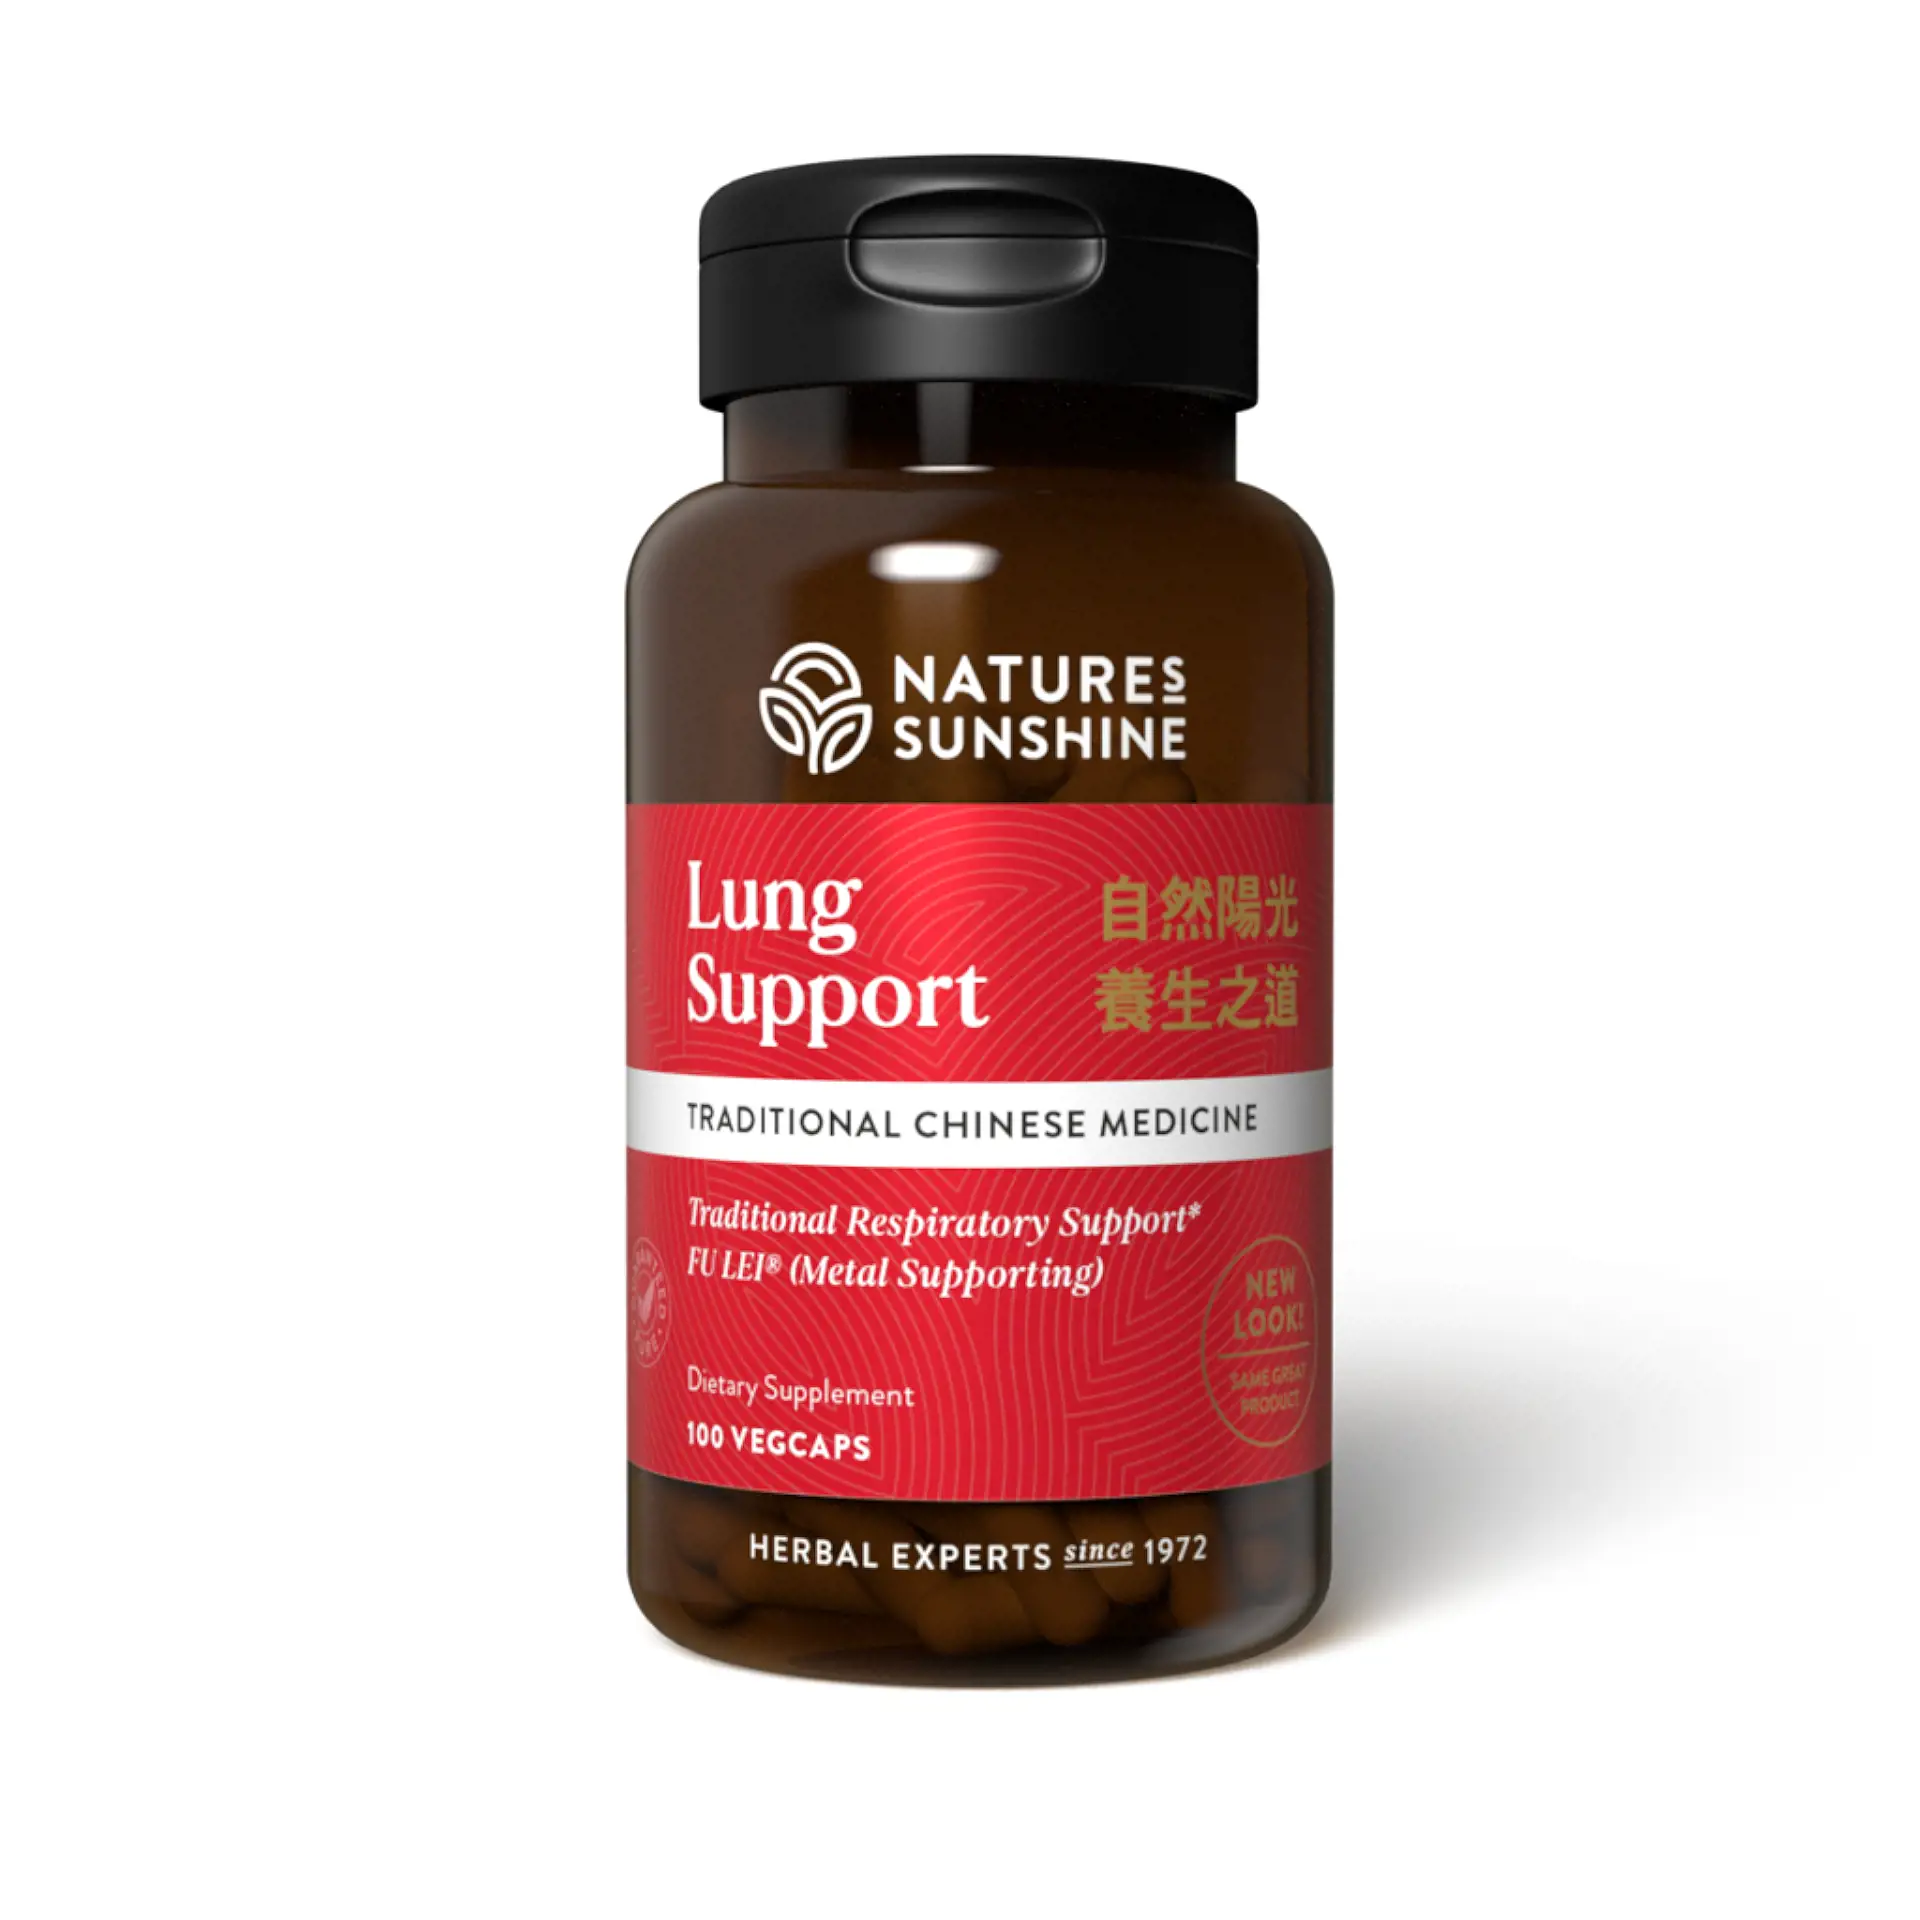 Lus1887_lung-support_bottle-1024x1024-1920